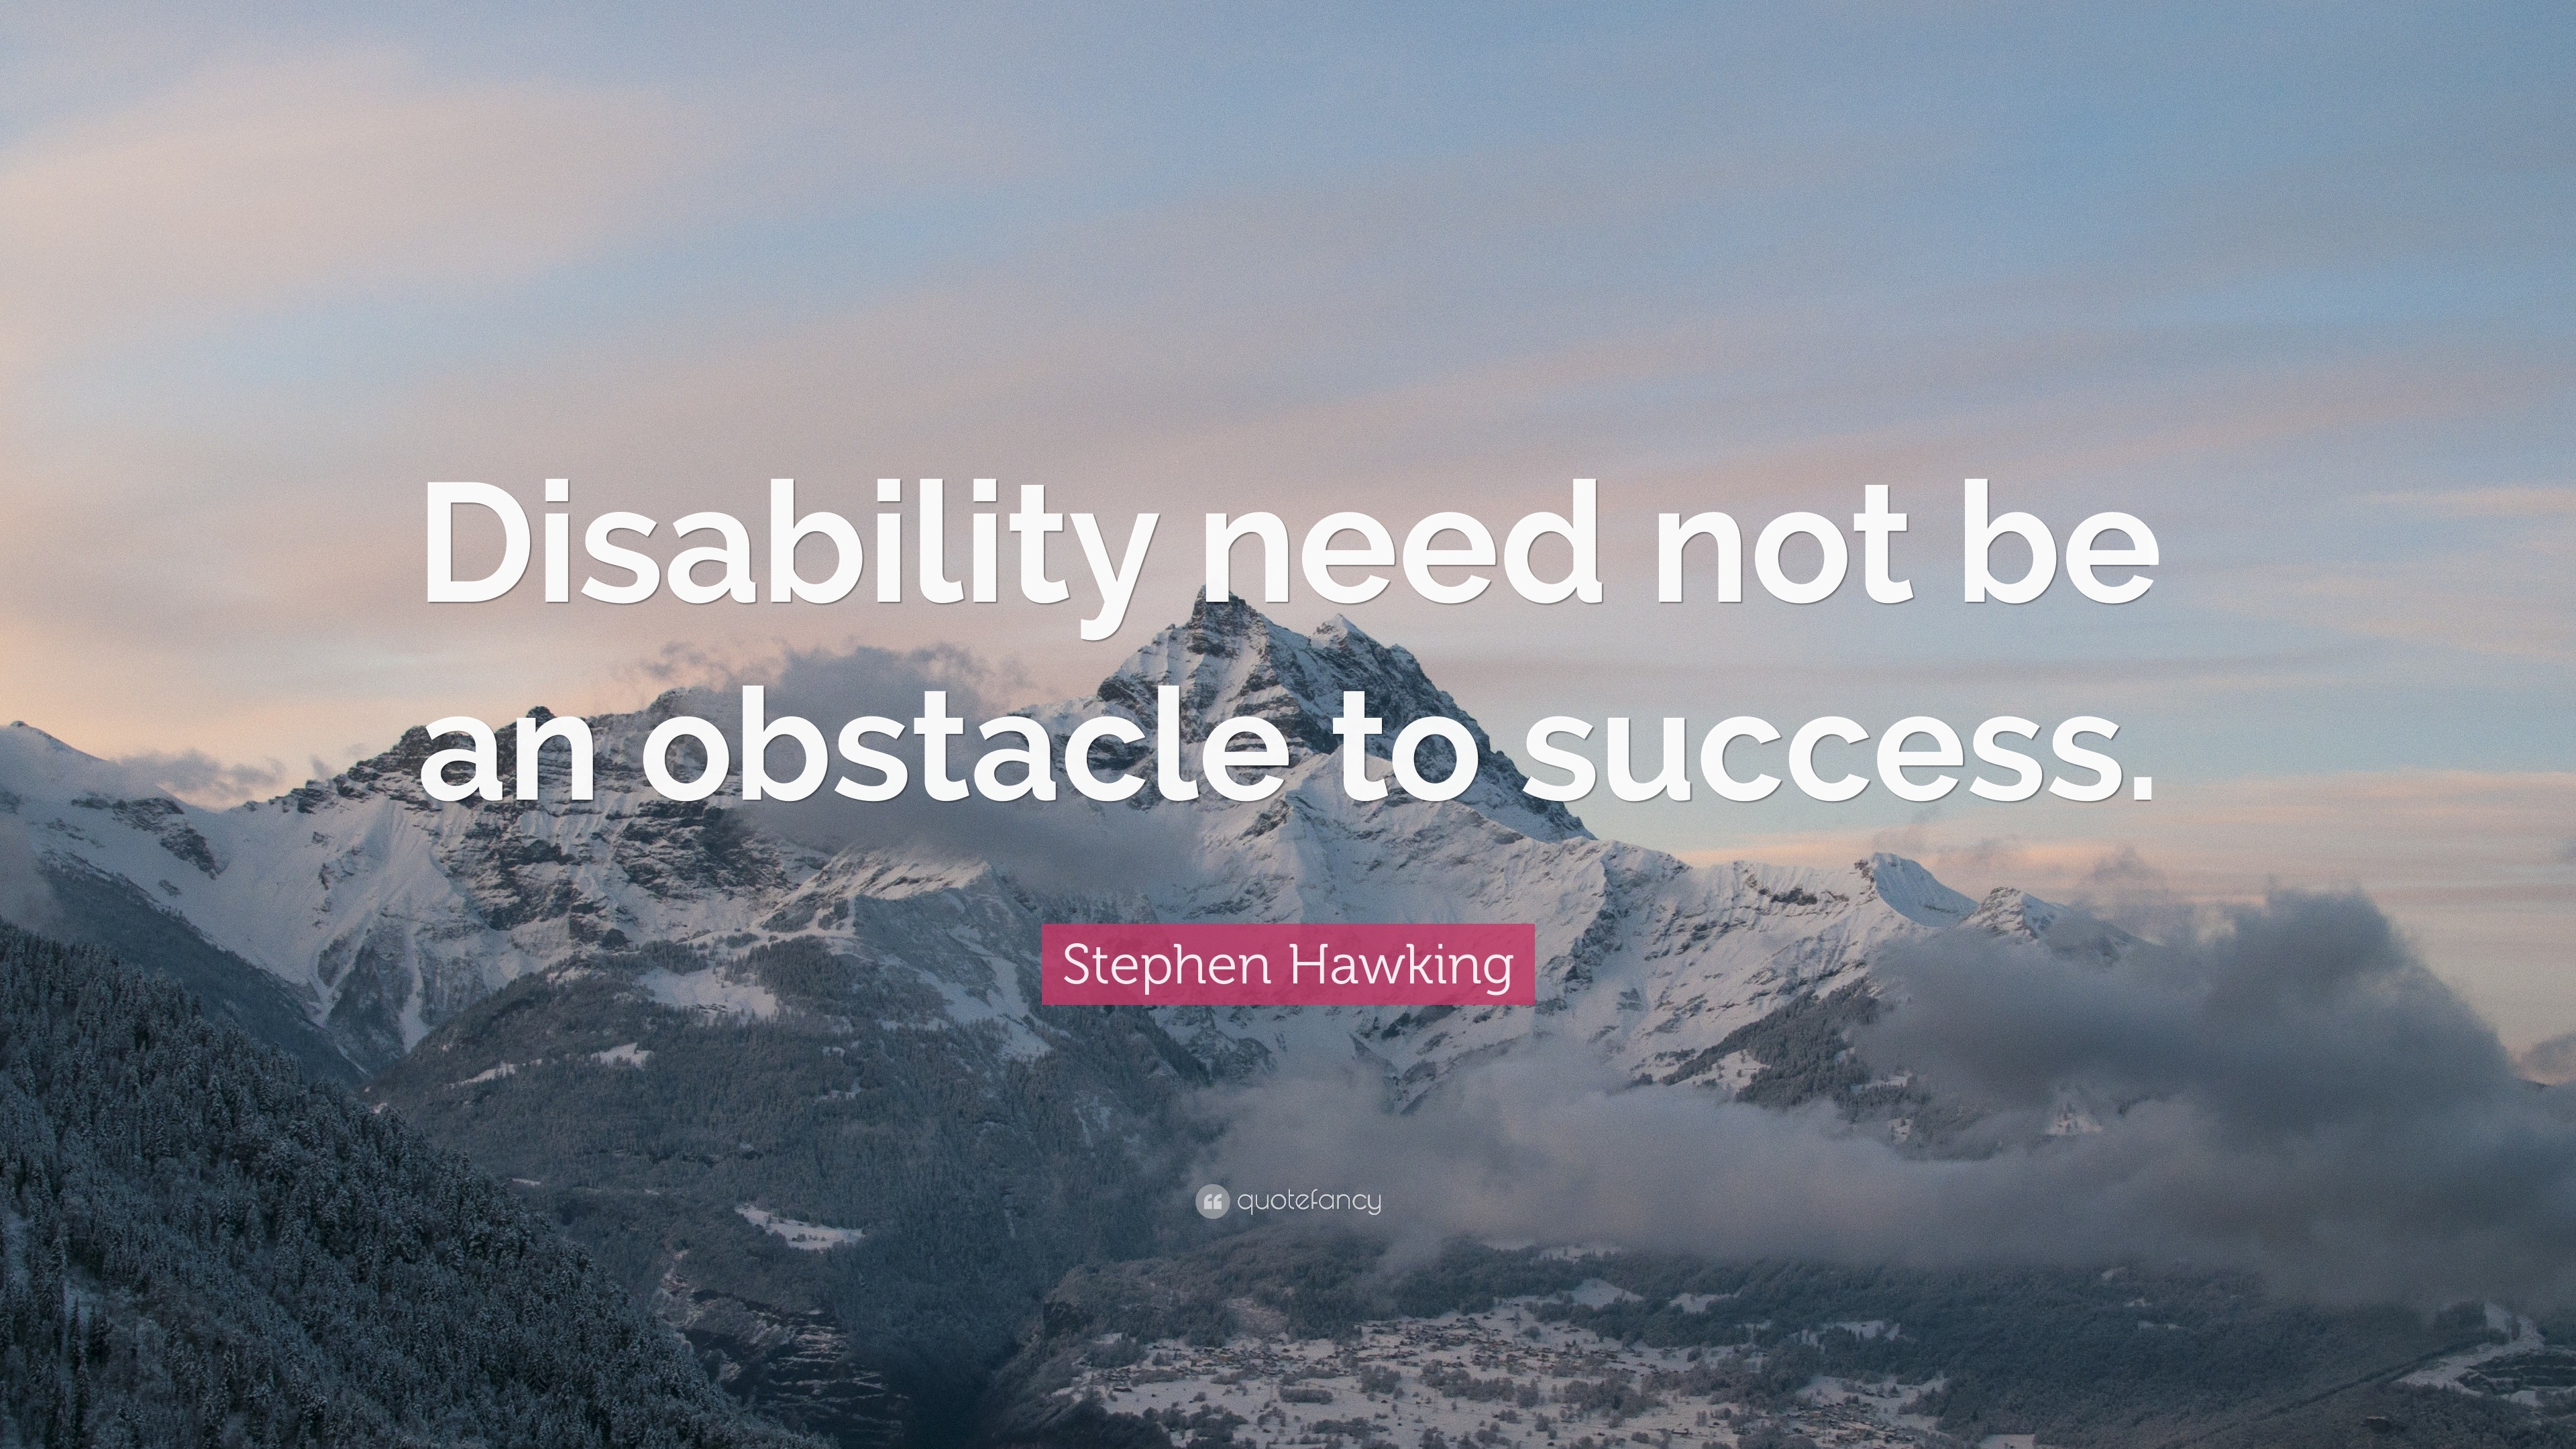 essay about disability is not an obstacle for success